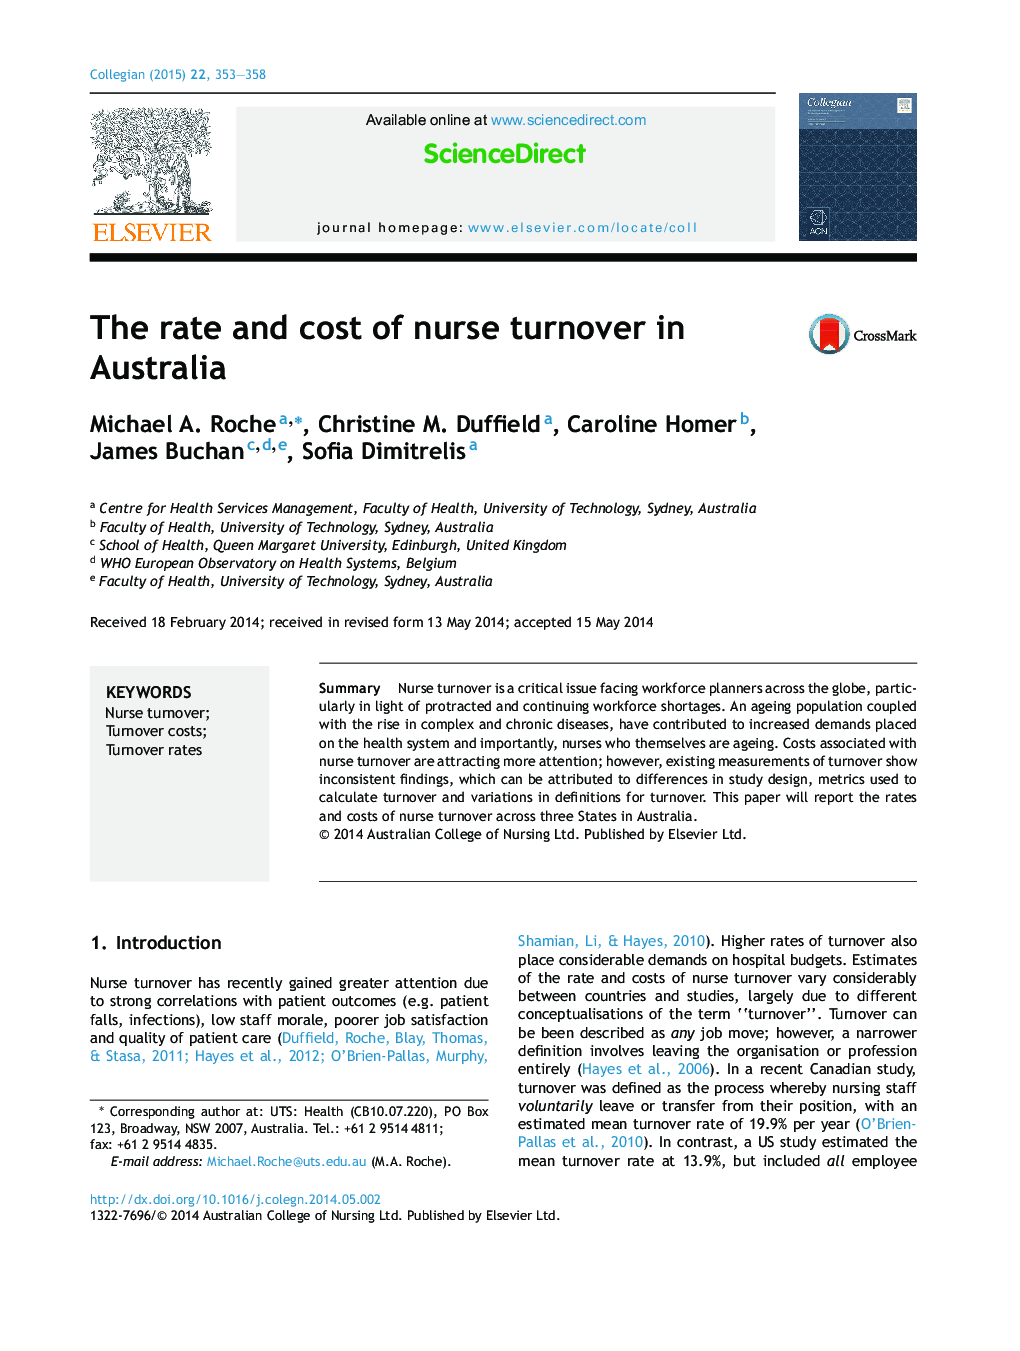 The rate and cost of nurse turnover in Australia